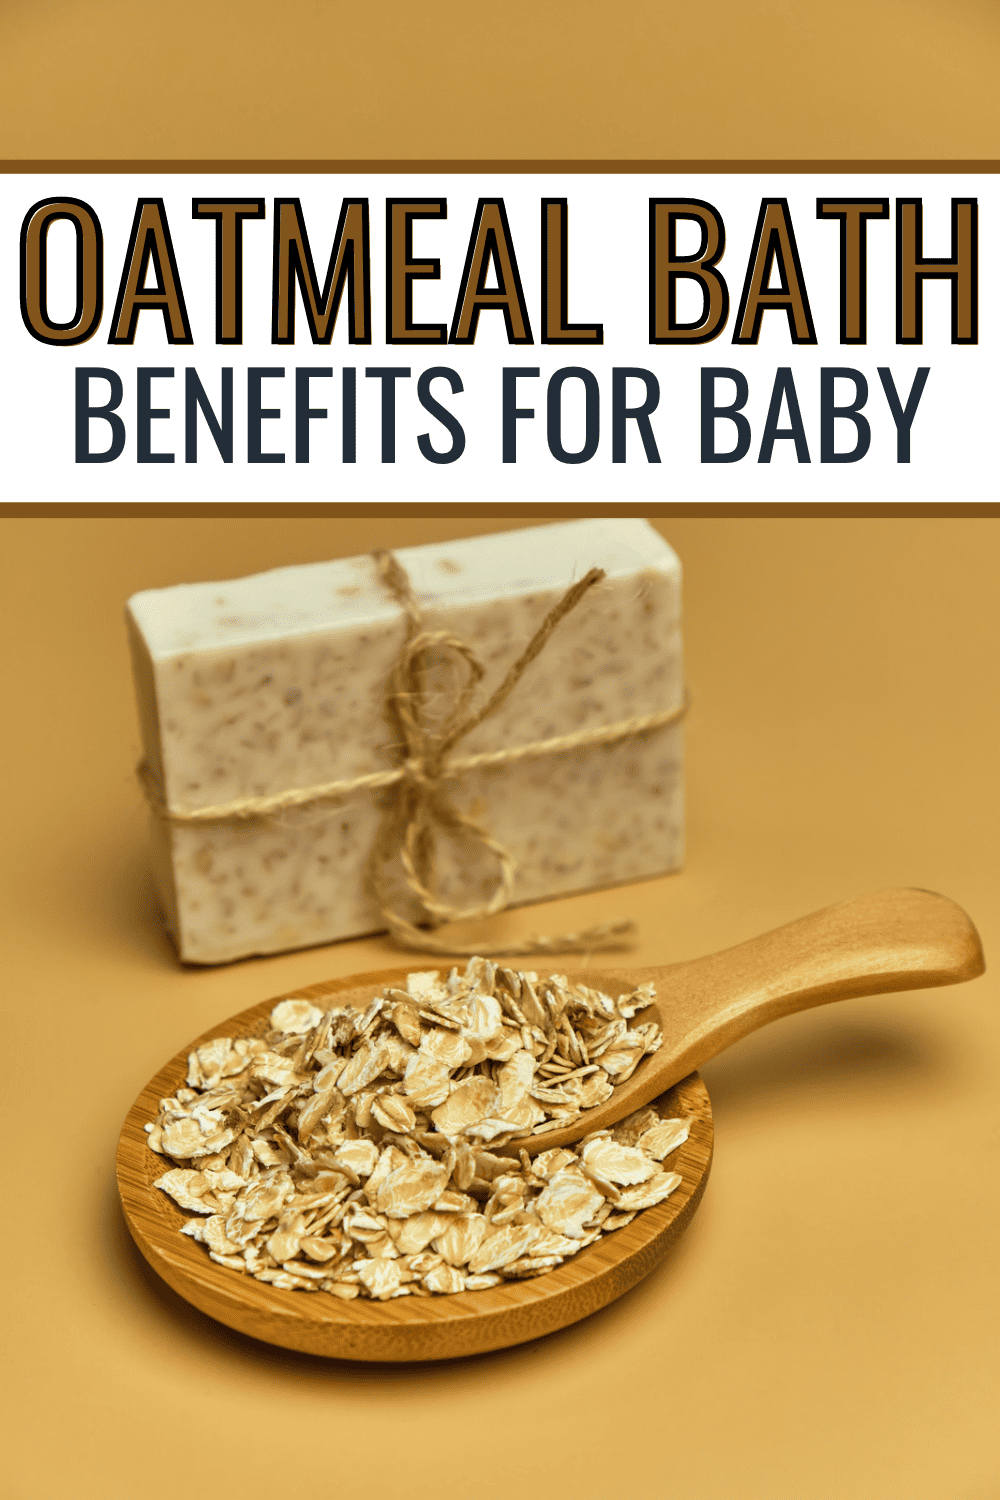 Oatmeal Bath Benefits for Baby